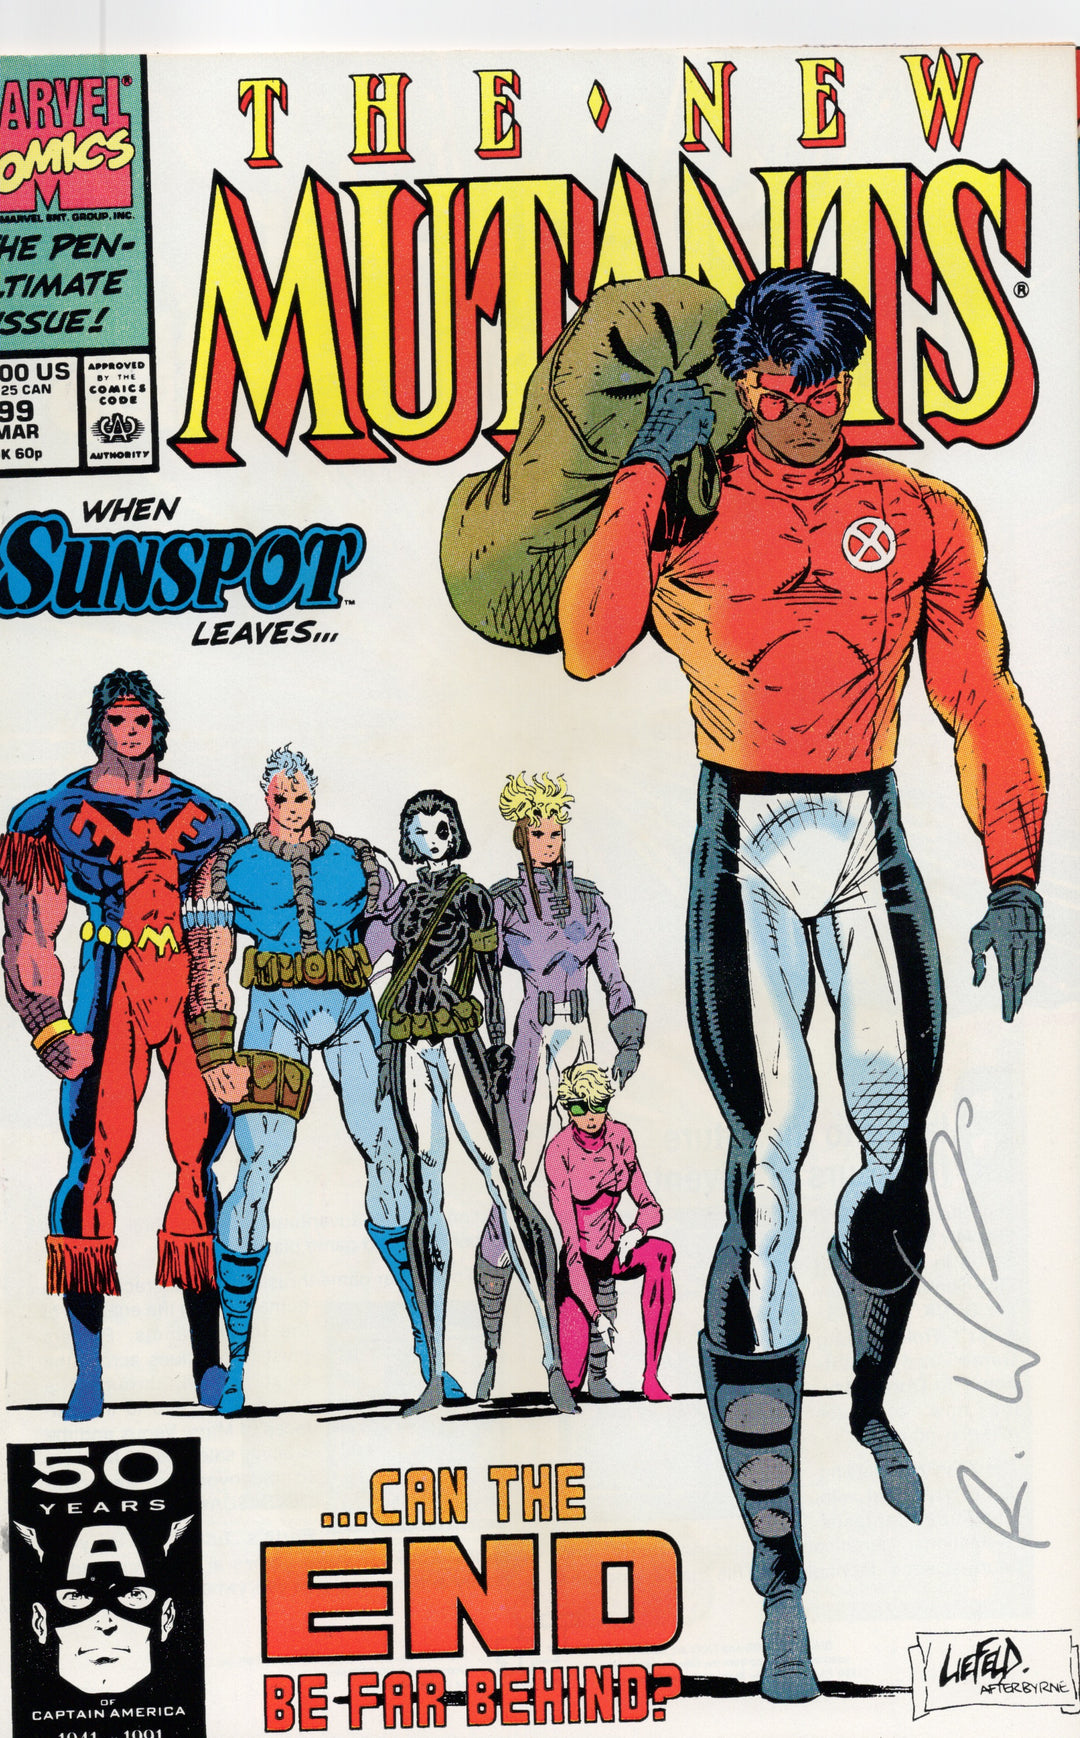 New Mutants #99 signed by Rob Liefeld w/ COA